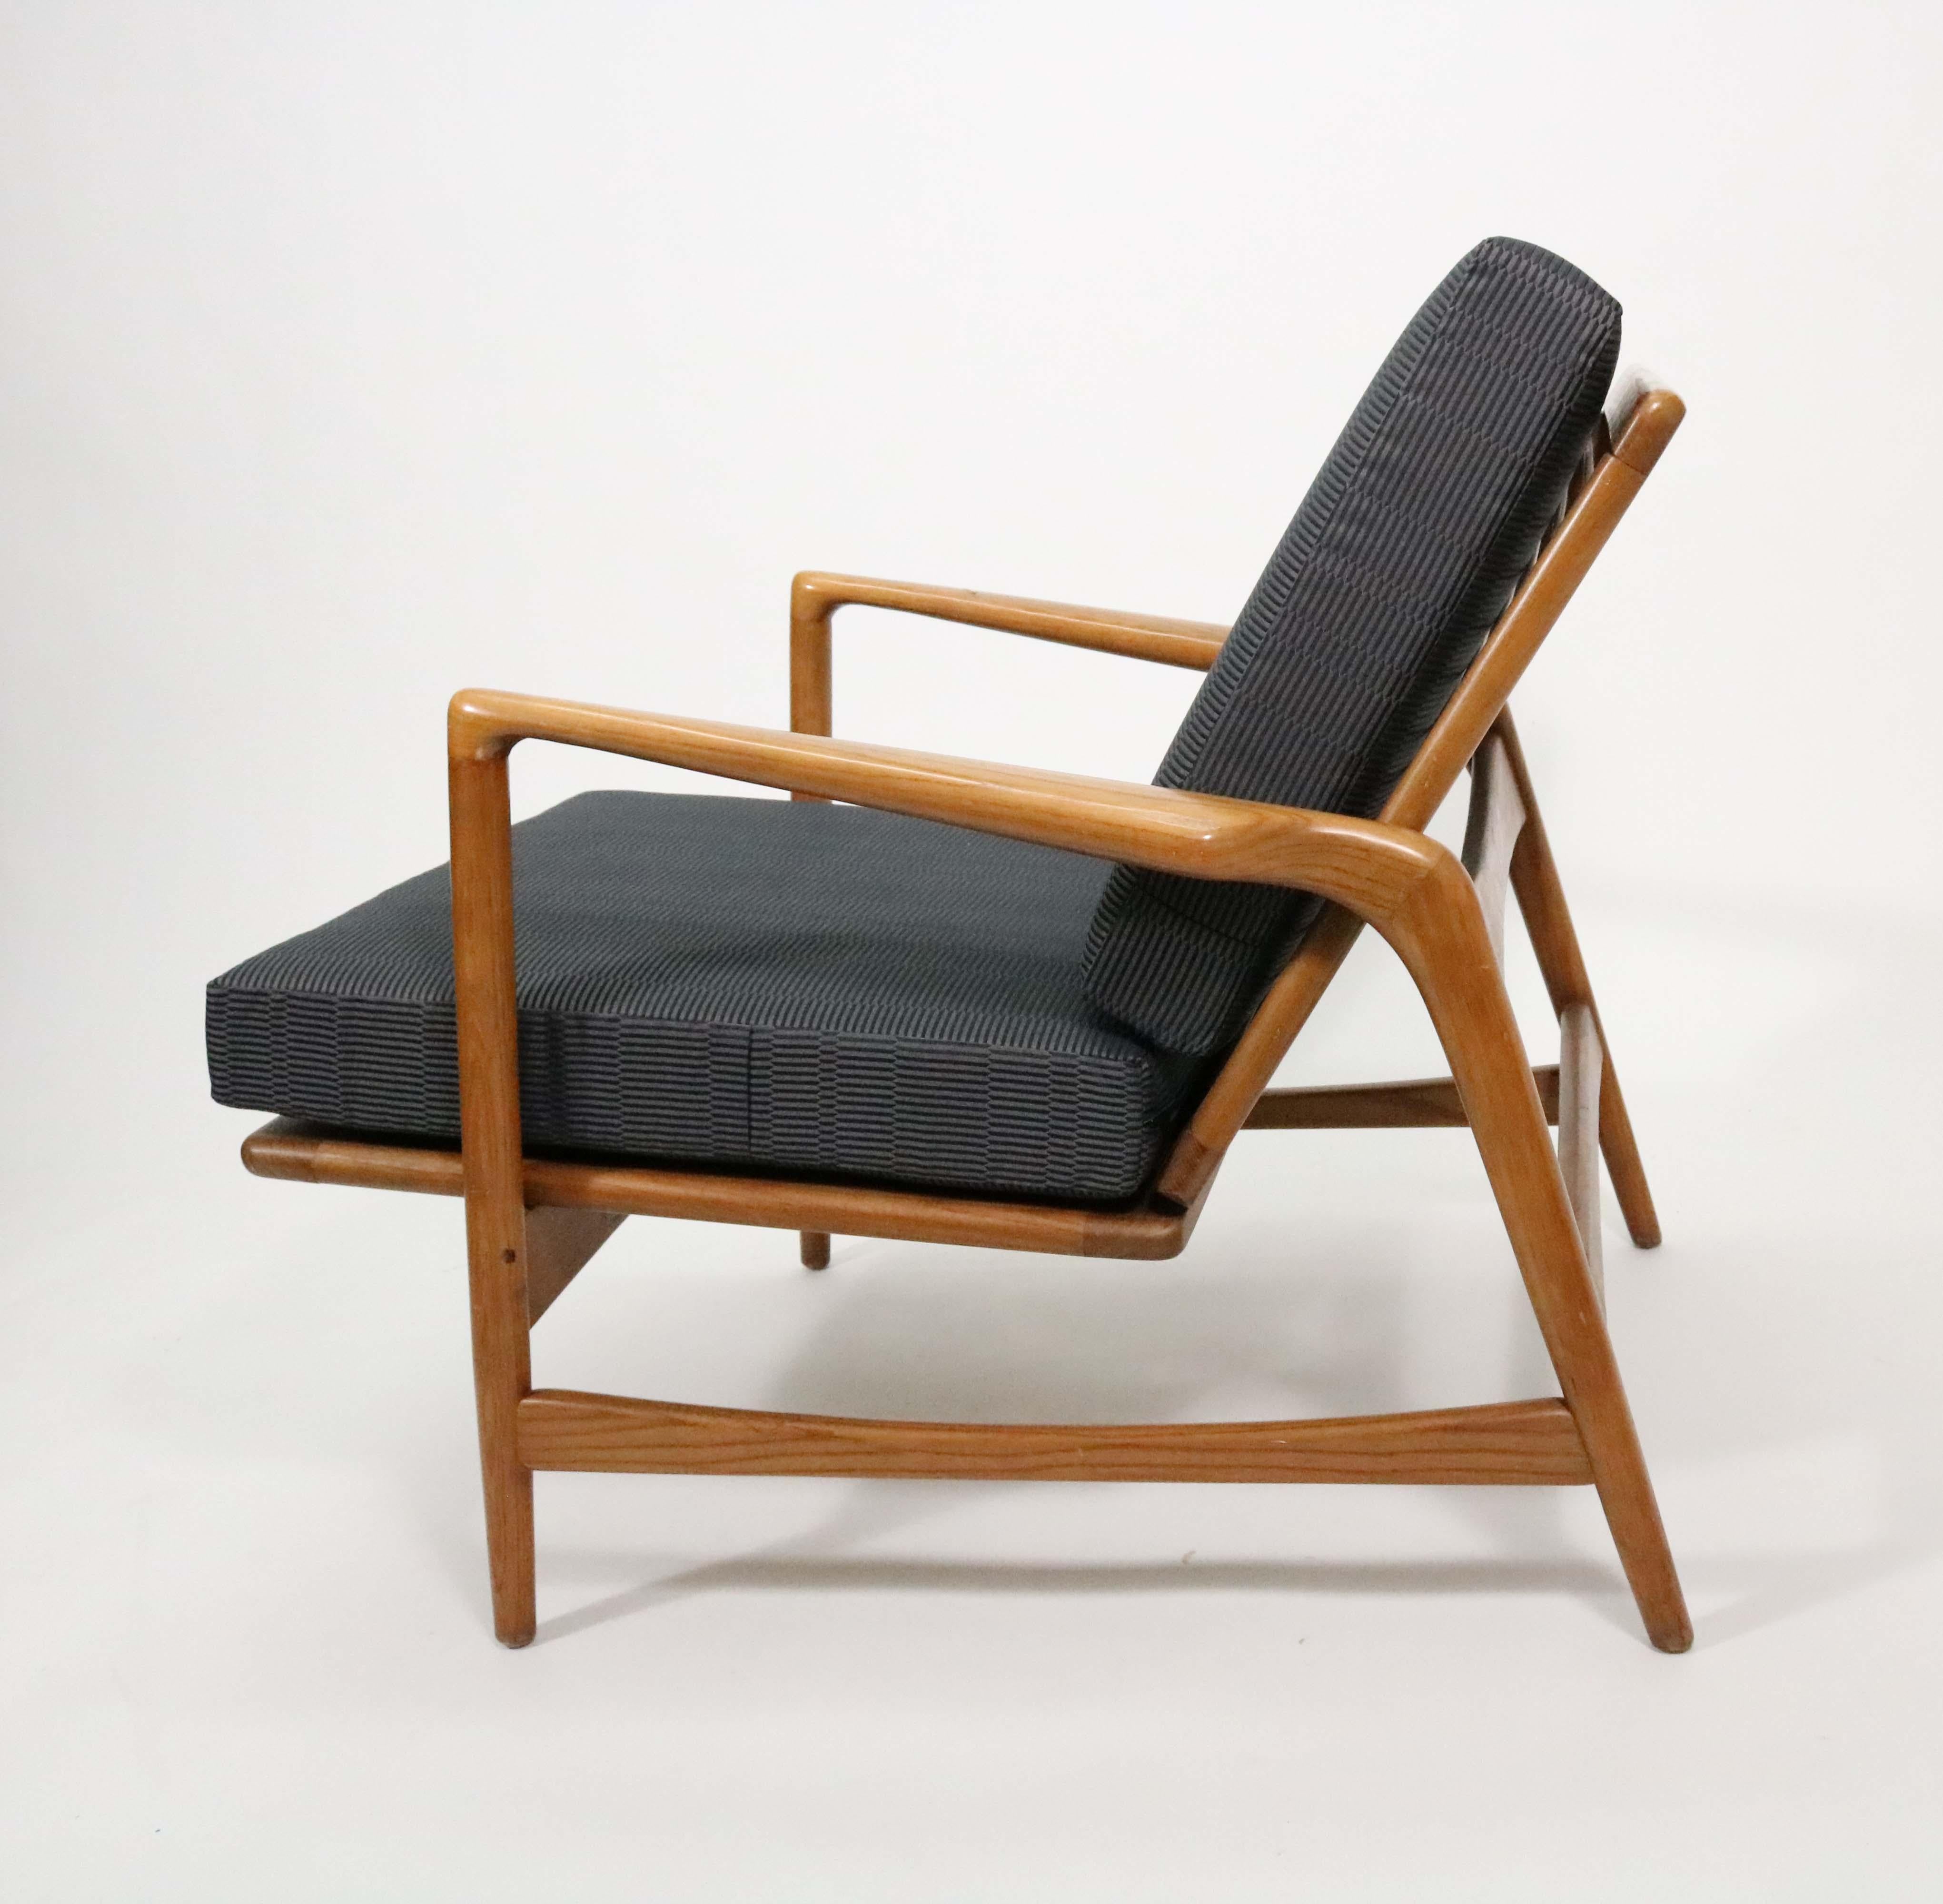 Mid-20th Century Walnut Lounge Chair and Ottoman with Adjustable Recline by Ib Kofod-Larsen